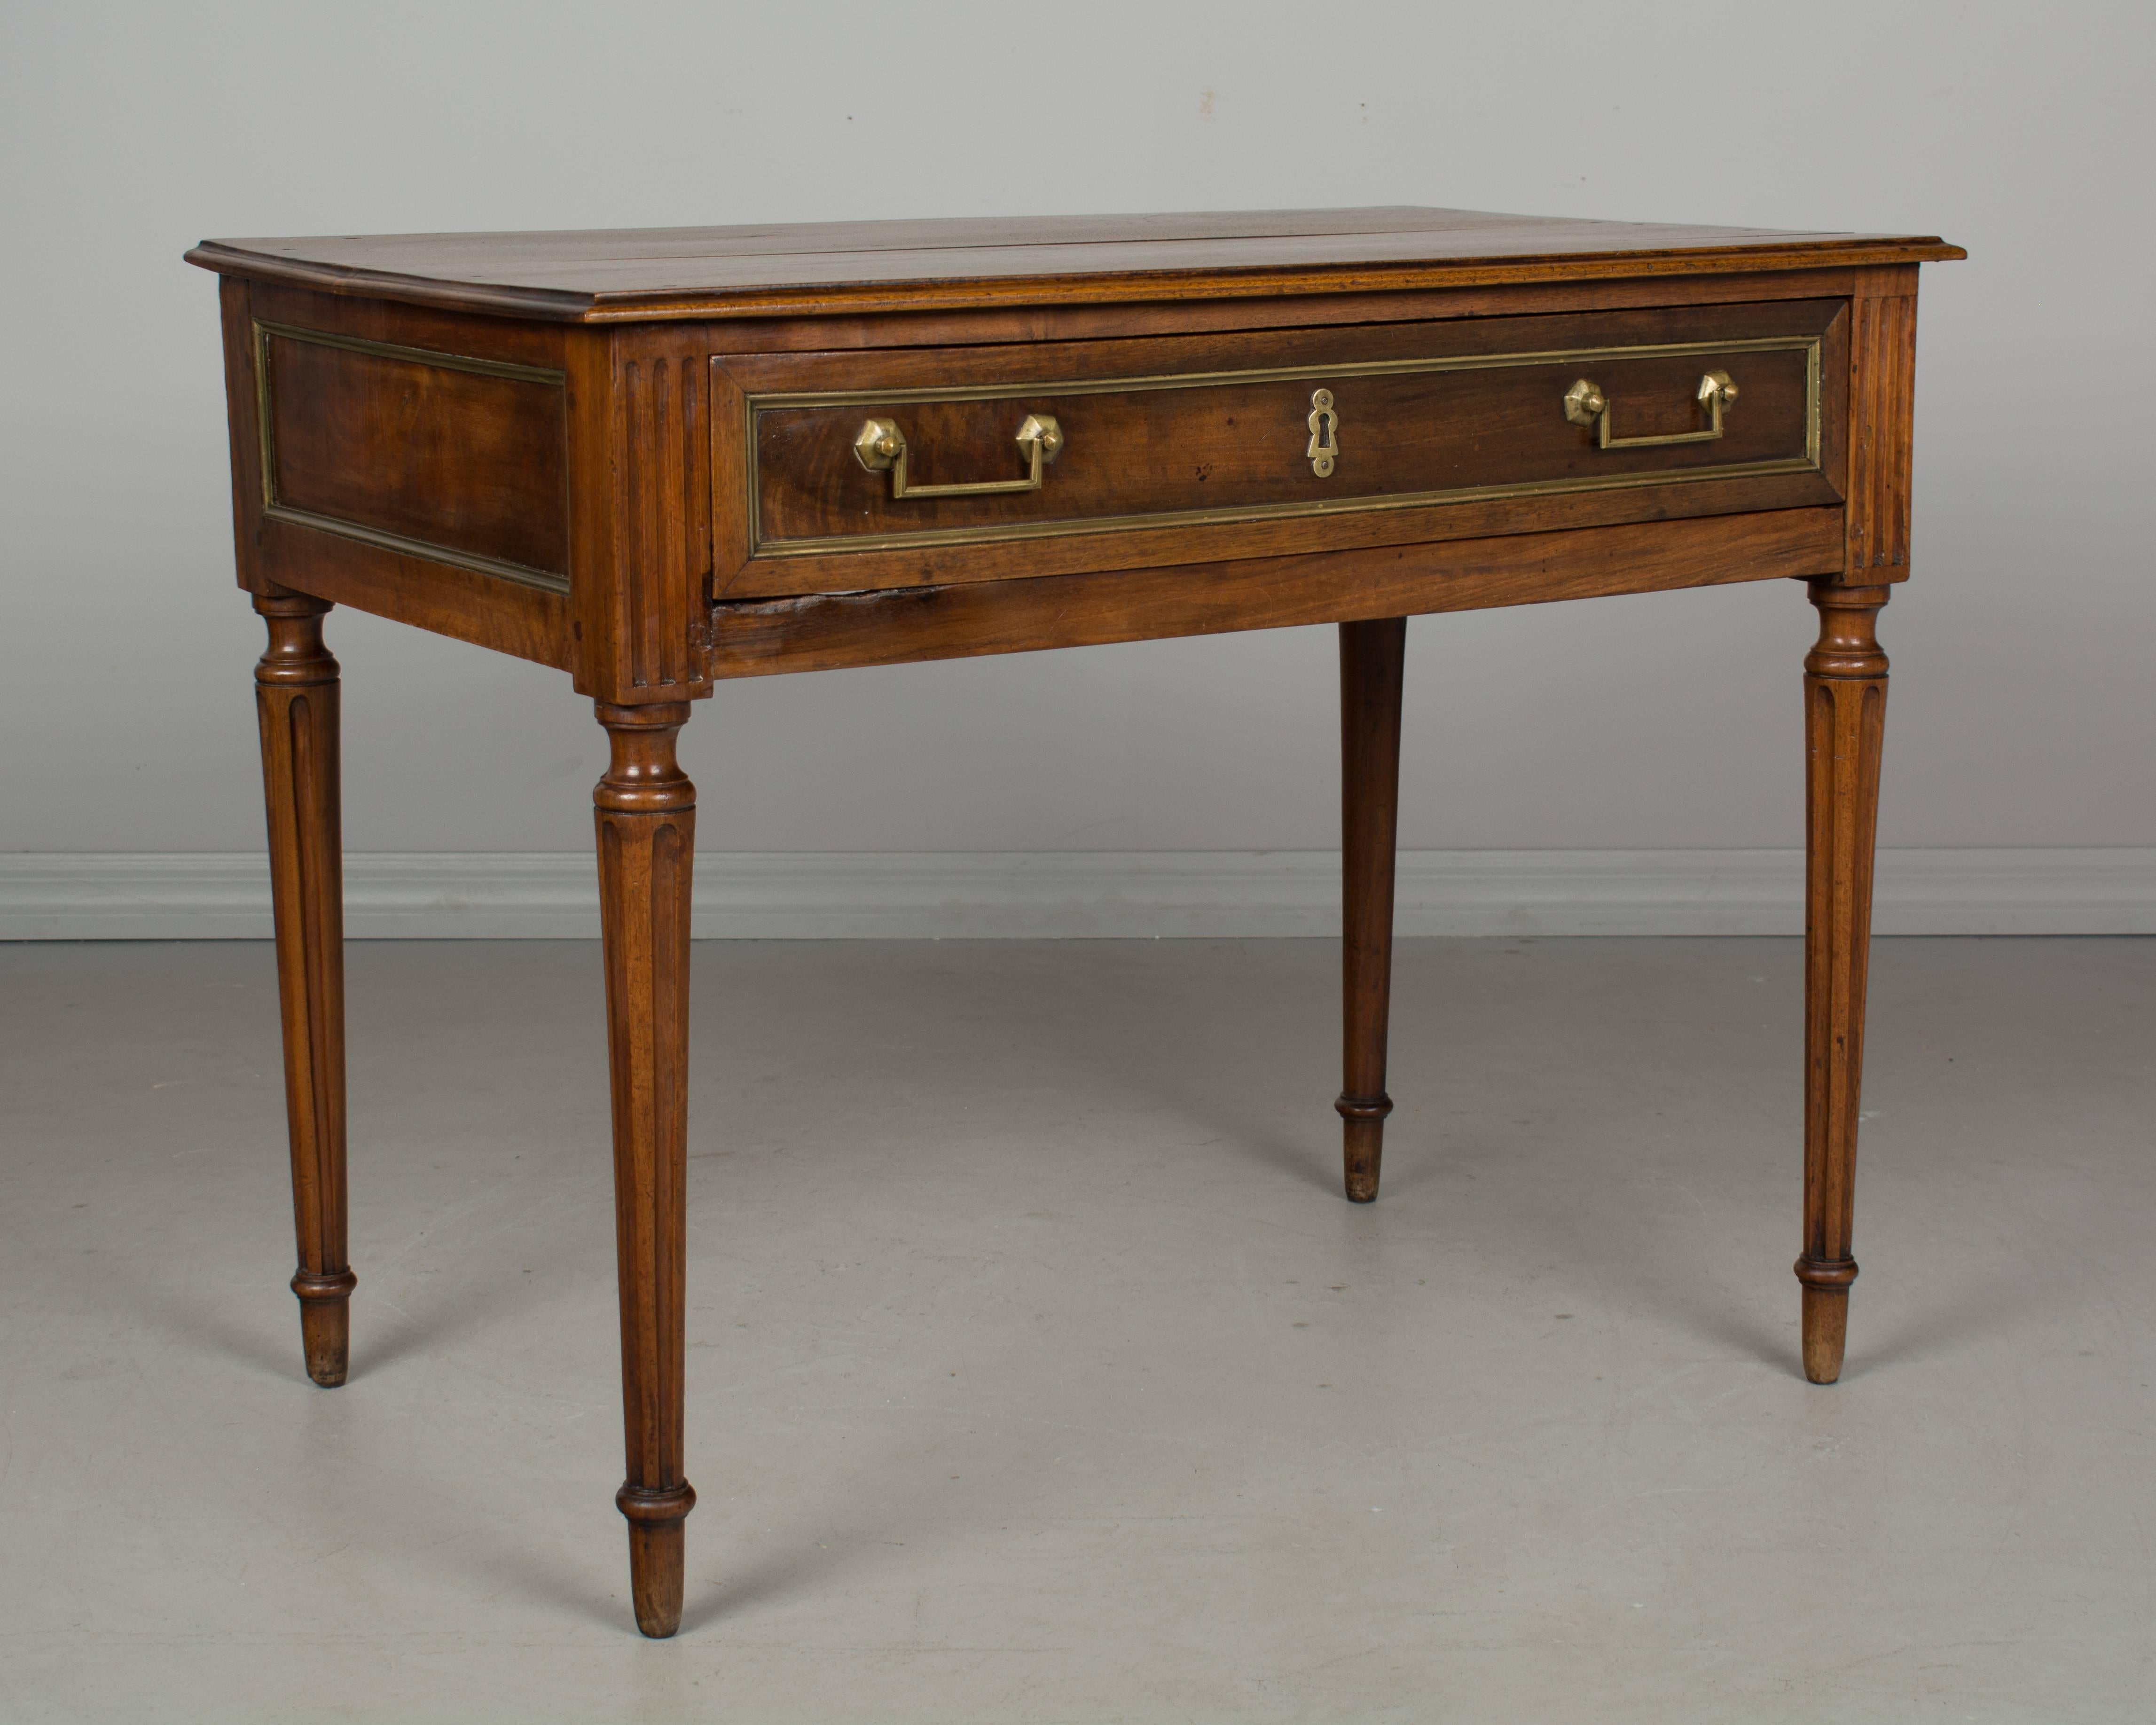 A 19th century French Louis XVI style writing table or side table made of walnut with brass inlaid trim. Large dovetailed drawer with brass pulls. Keyhole but no lock. Slender turned fluted legs. Waxed finish. All original. Clearance of 21 inches.